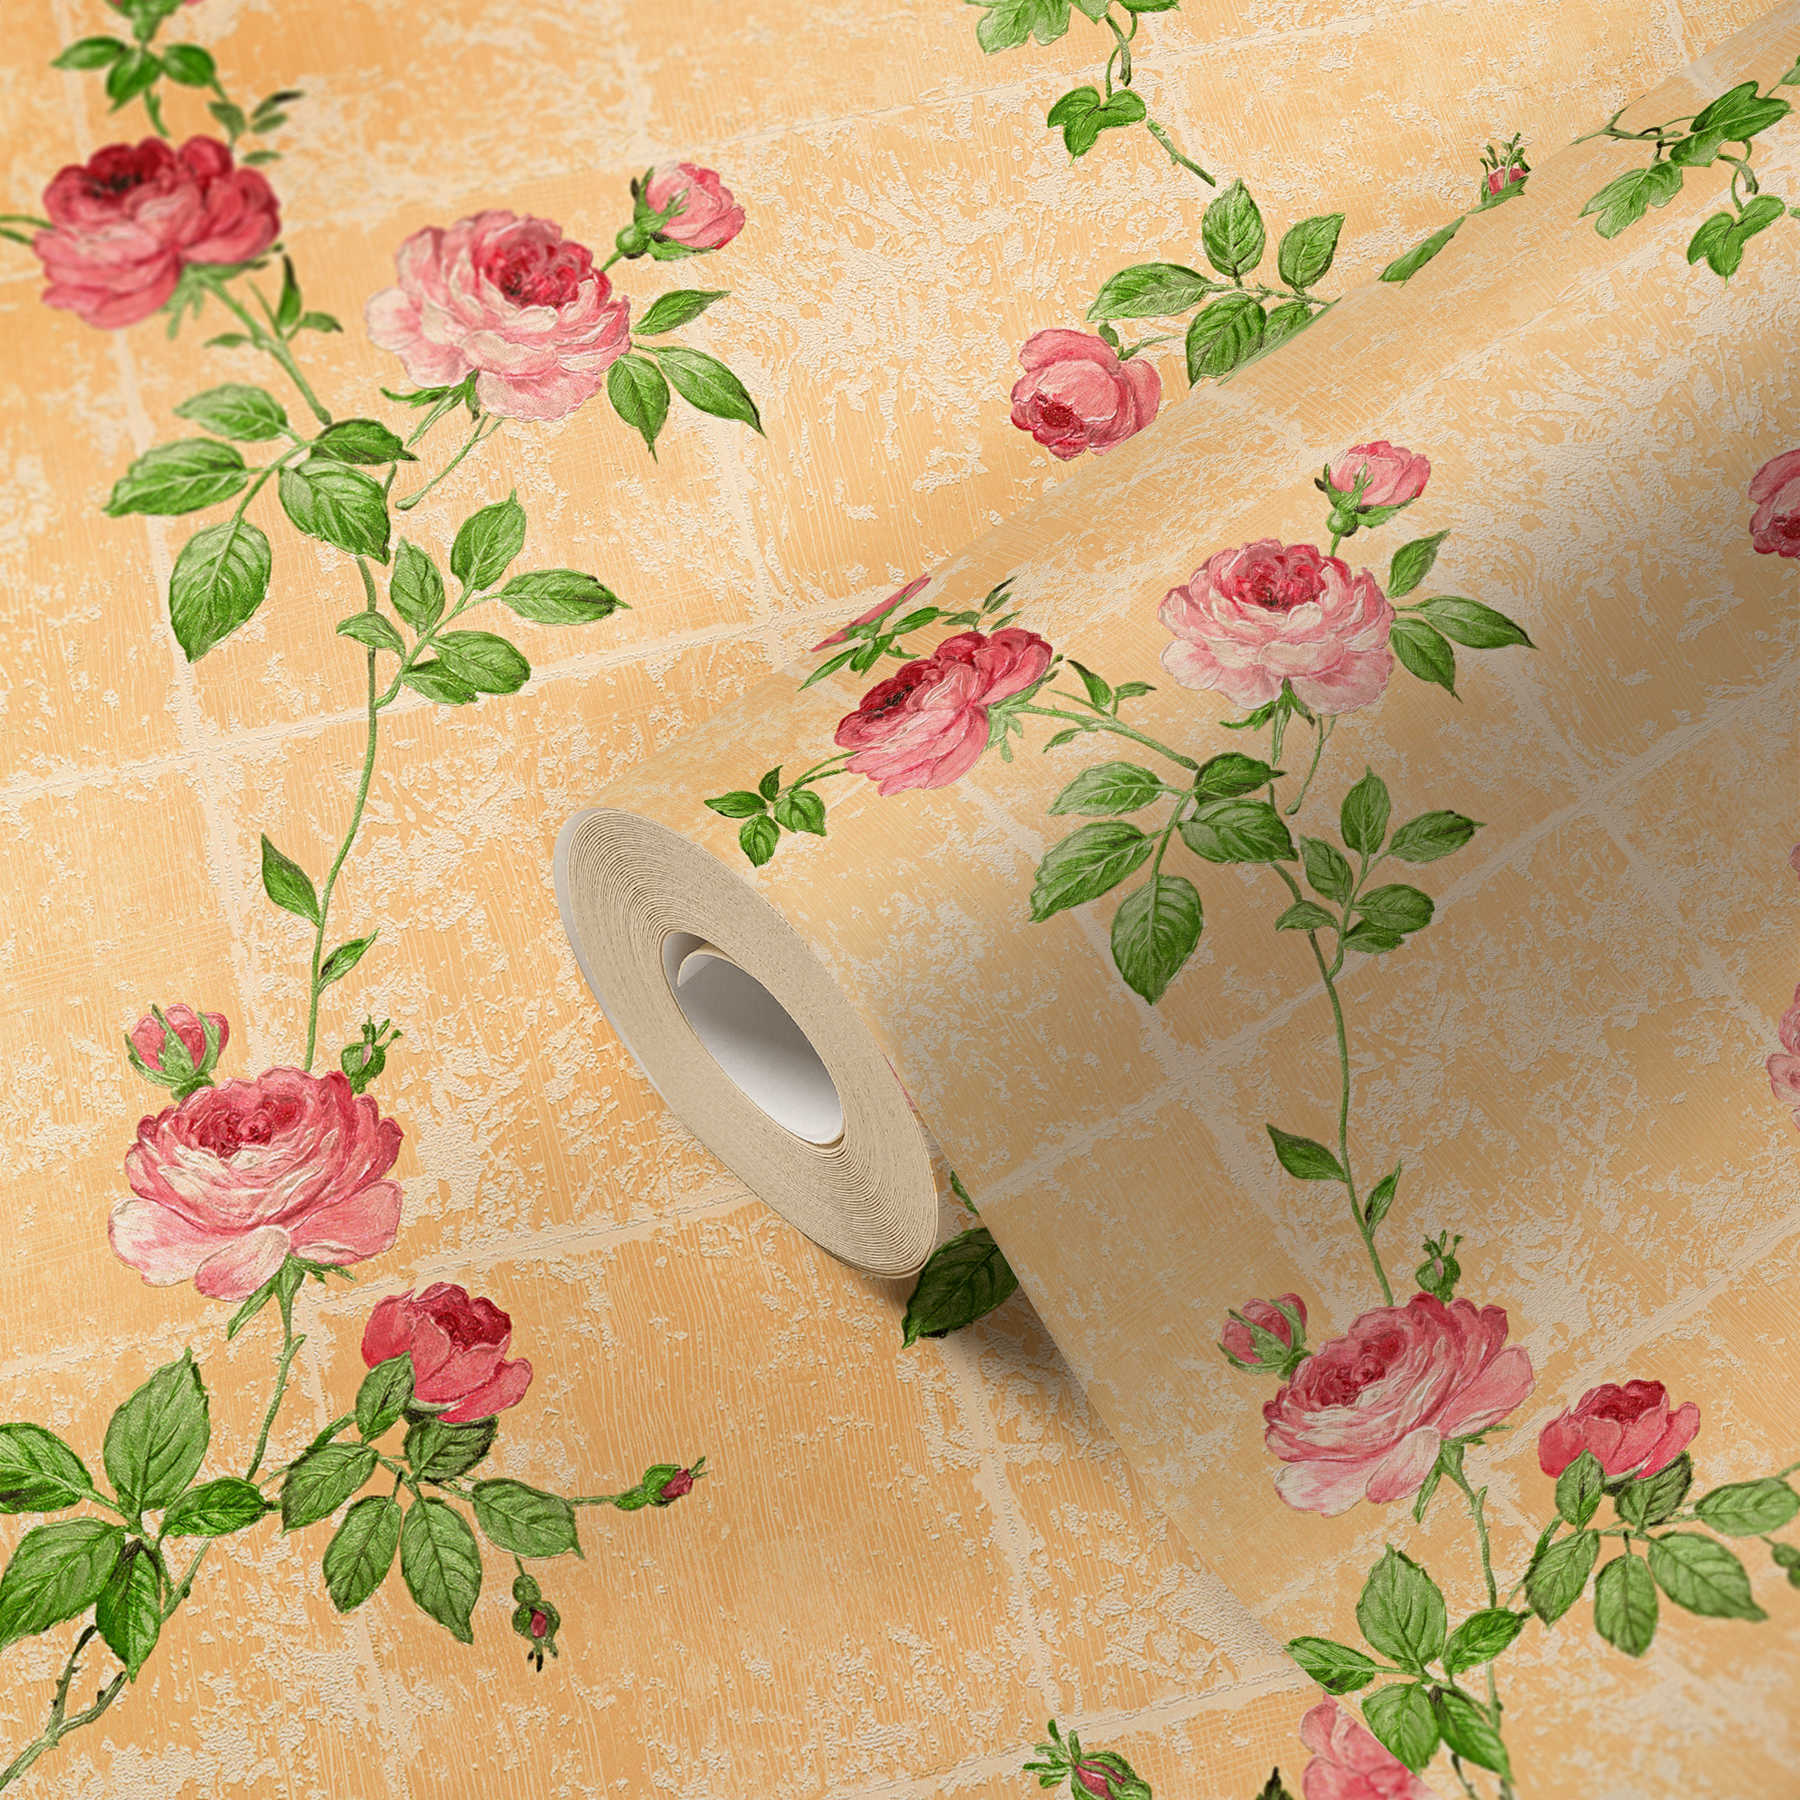             Tile optics wallpaper rustic with roses - colourful
        